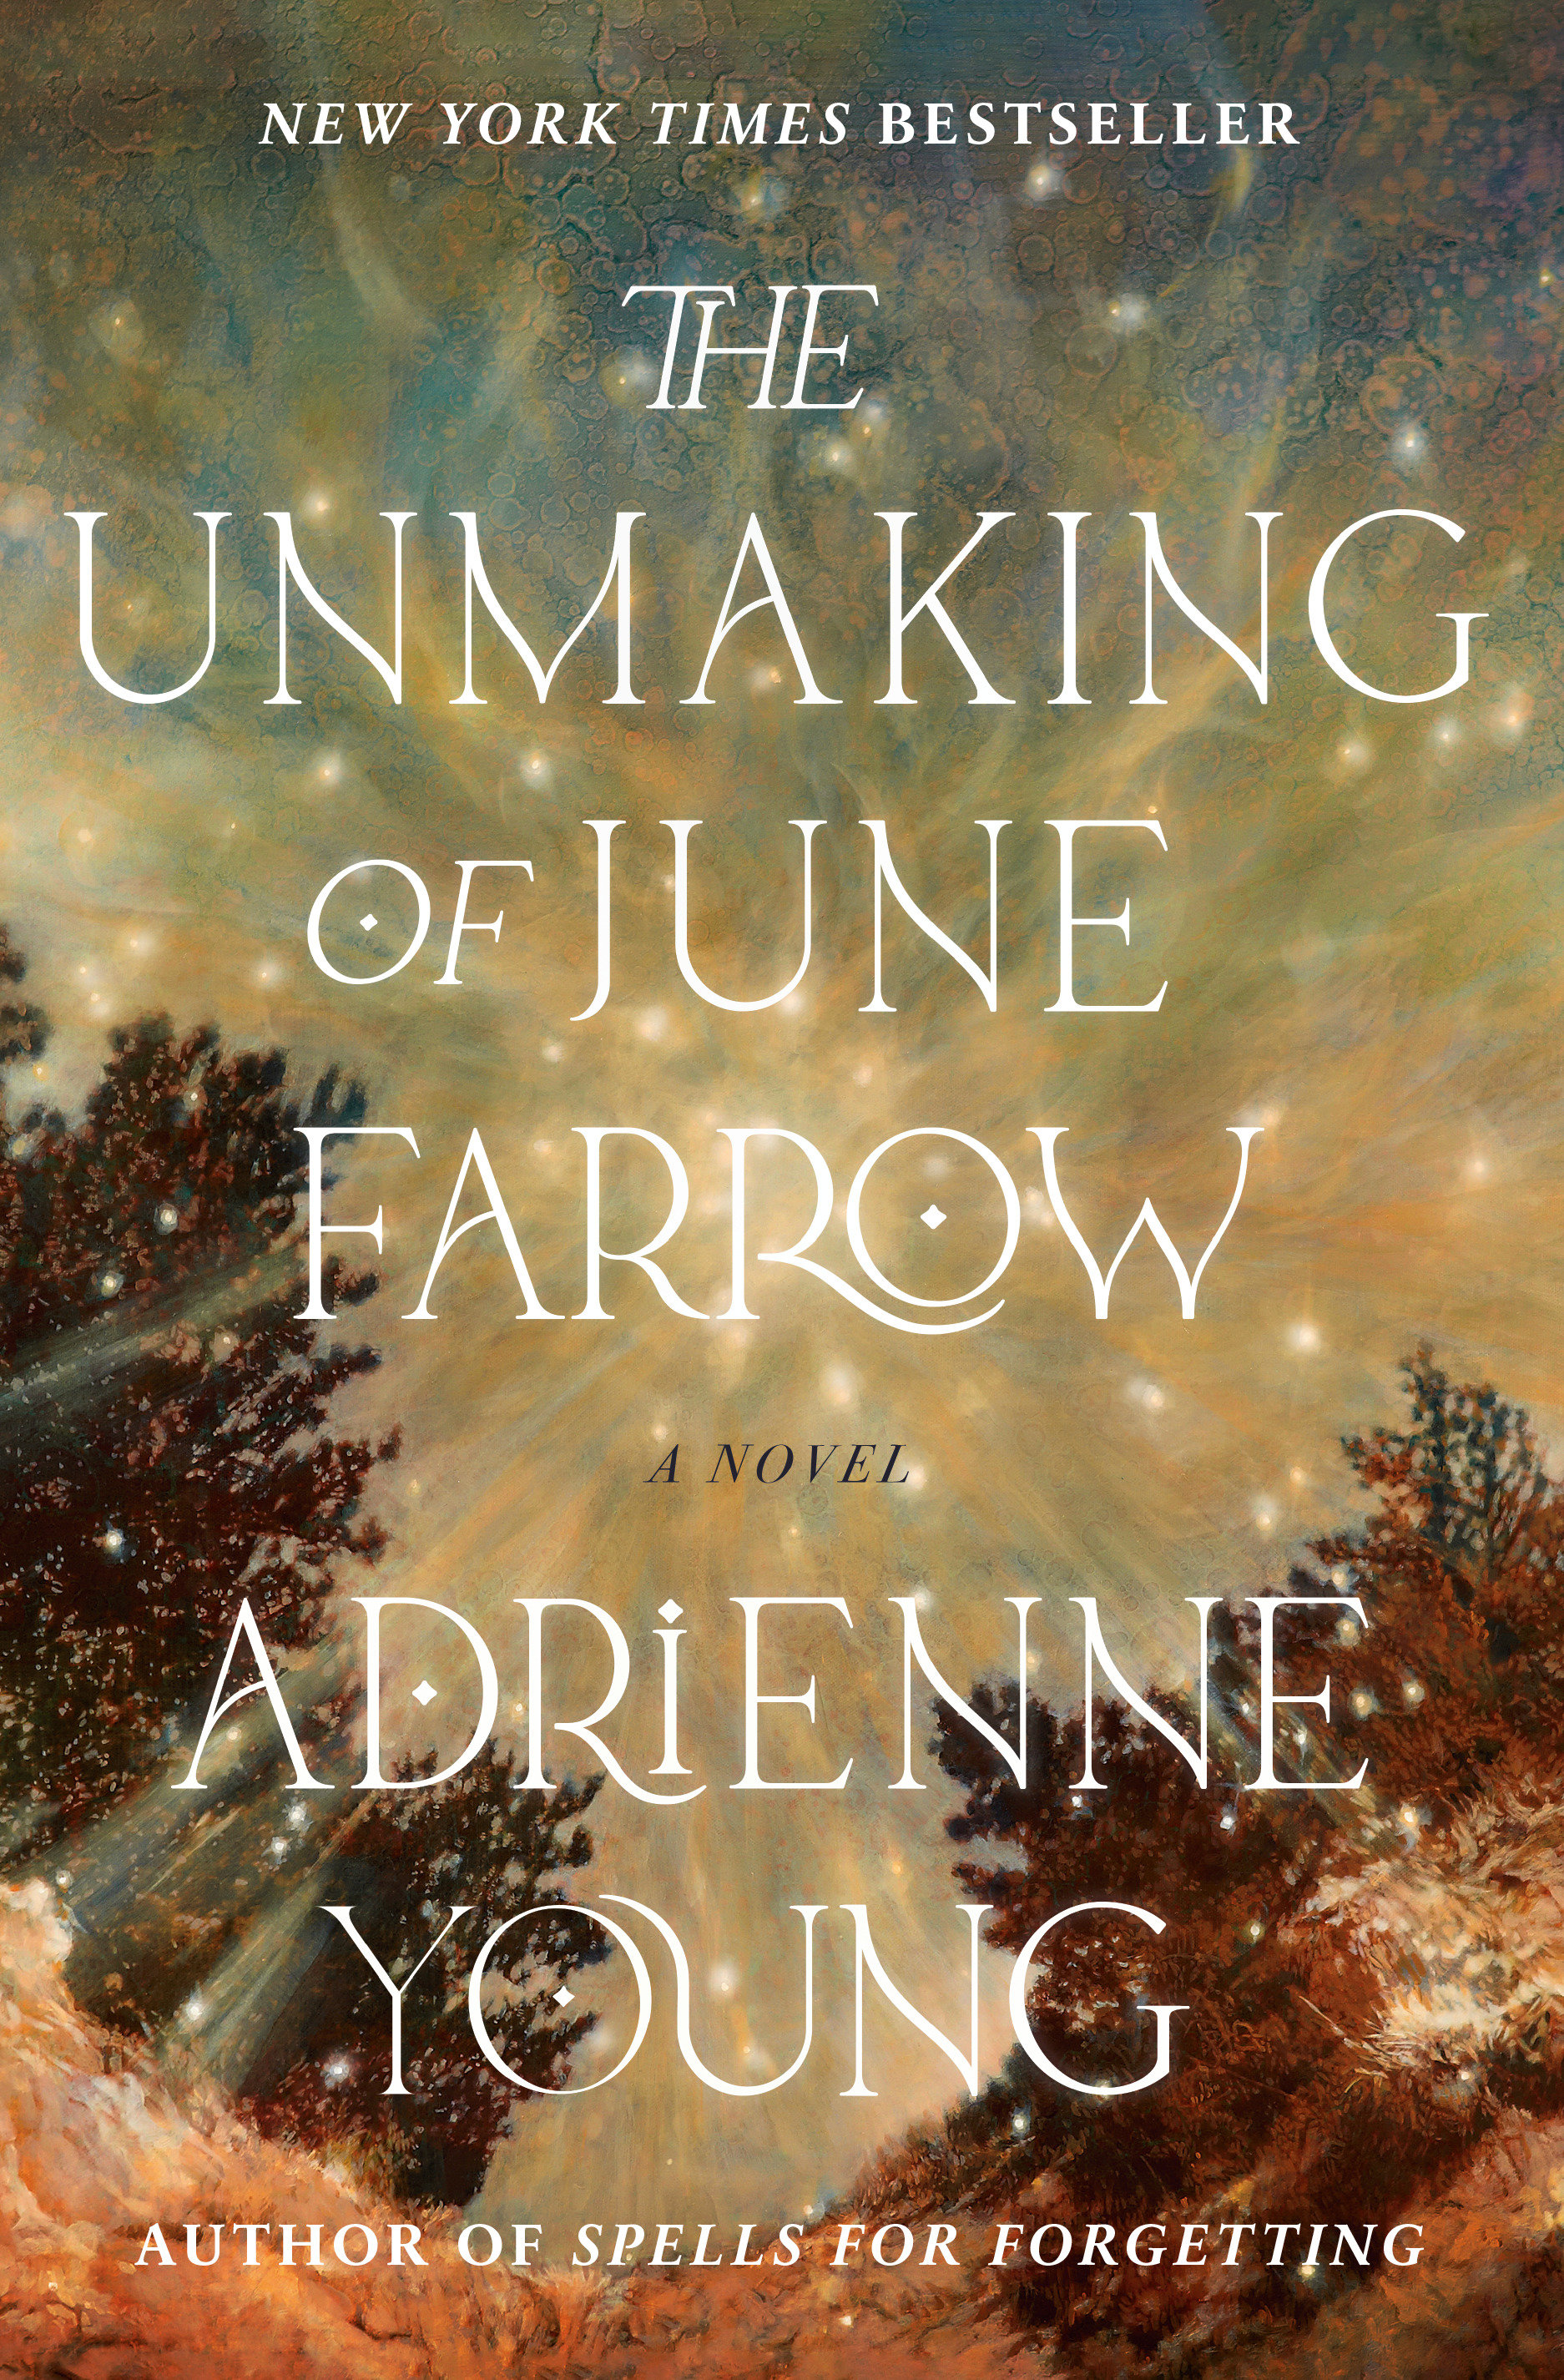 The Unmaking Of June Farrow (Hardcover Book)